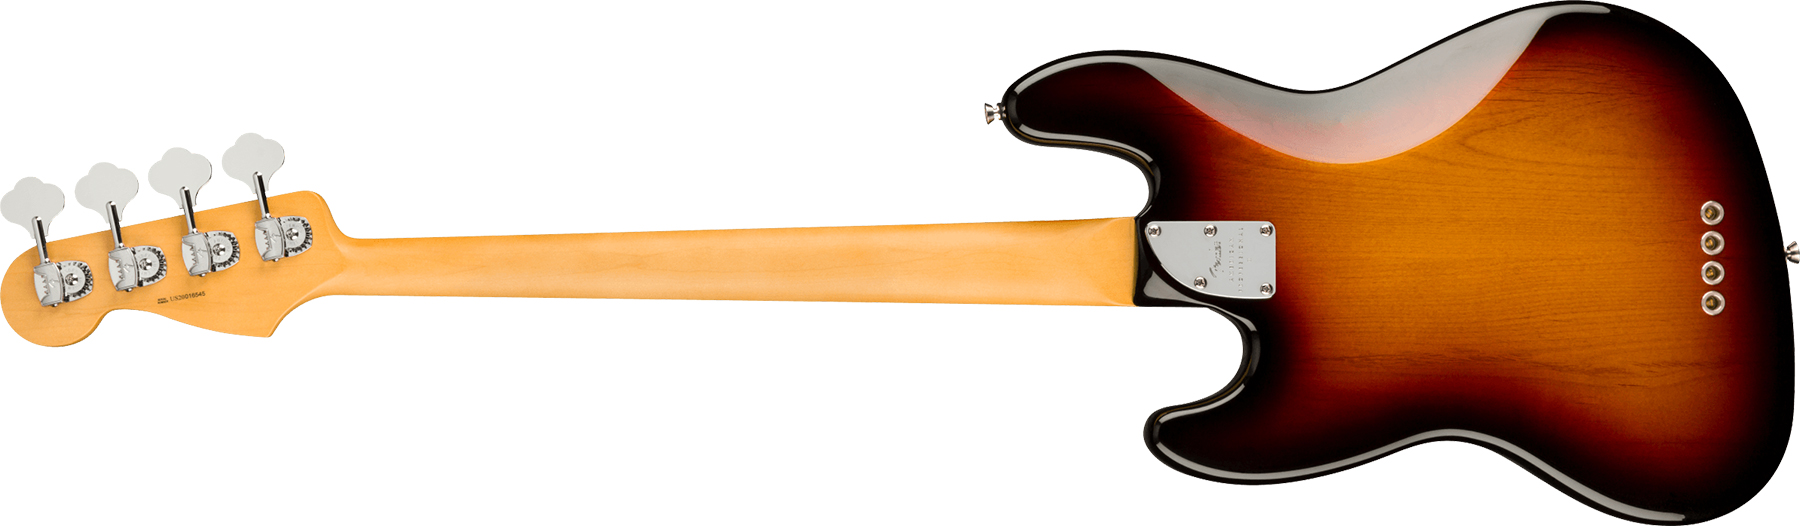 Fender Jazz Bass American Professional Ii Usa Mn - 3-color Sunburst - Solid body electric bass - Variation 1